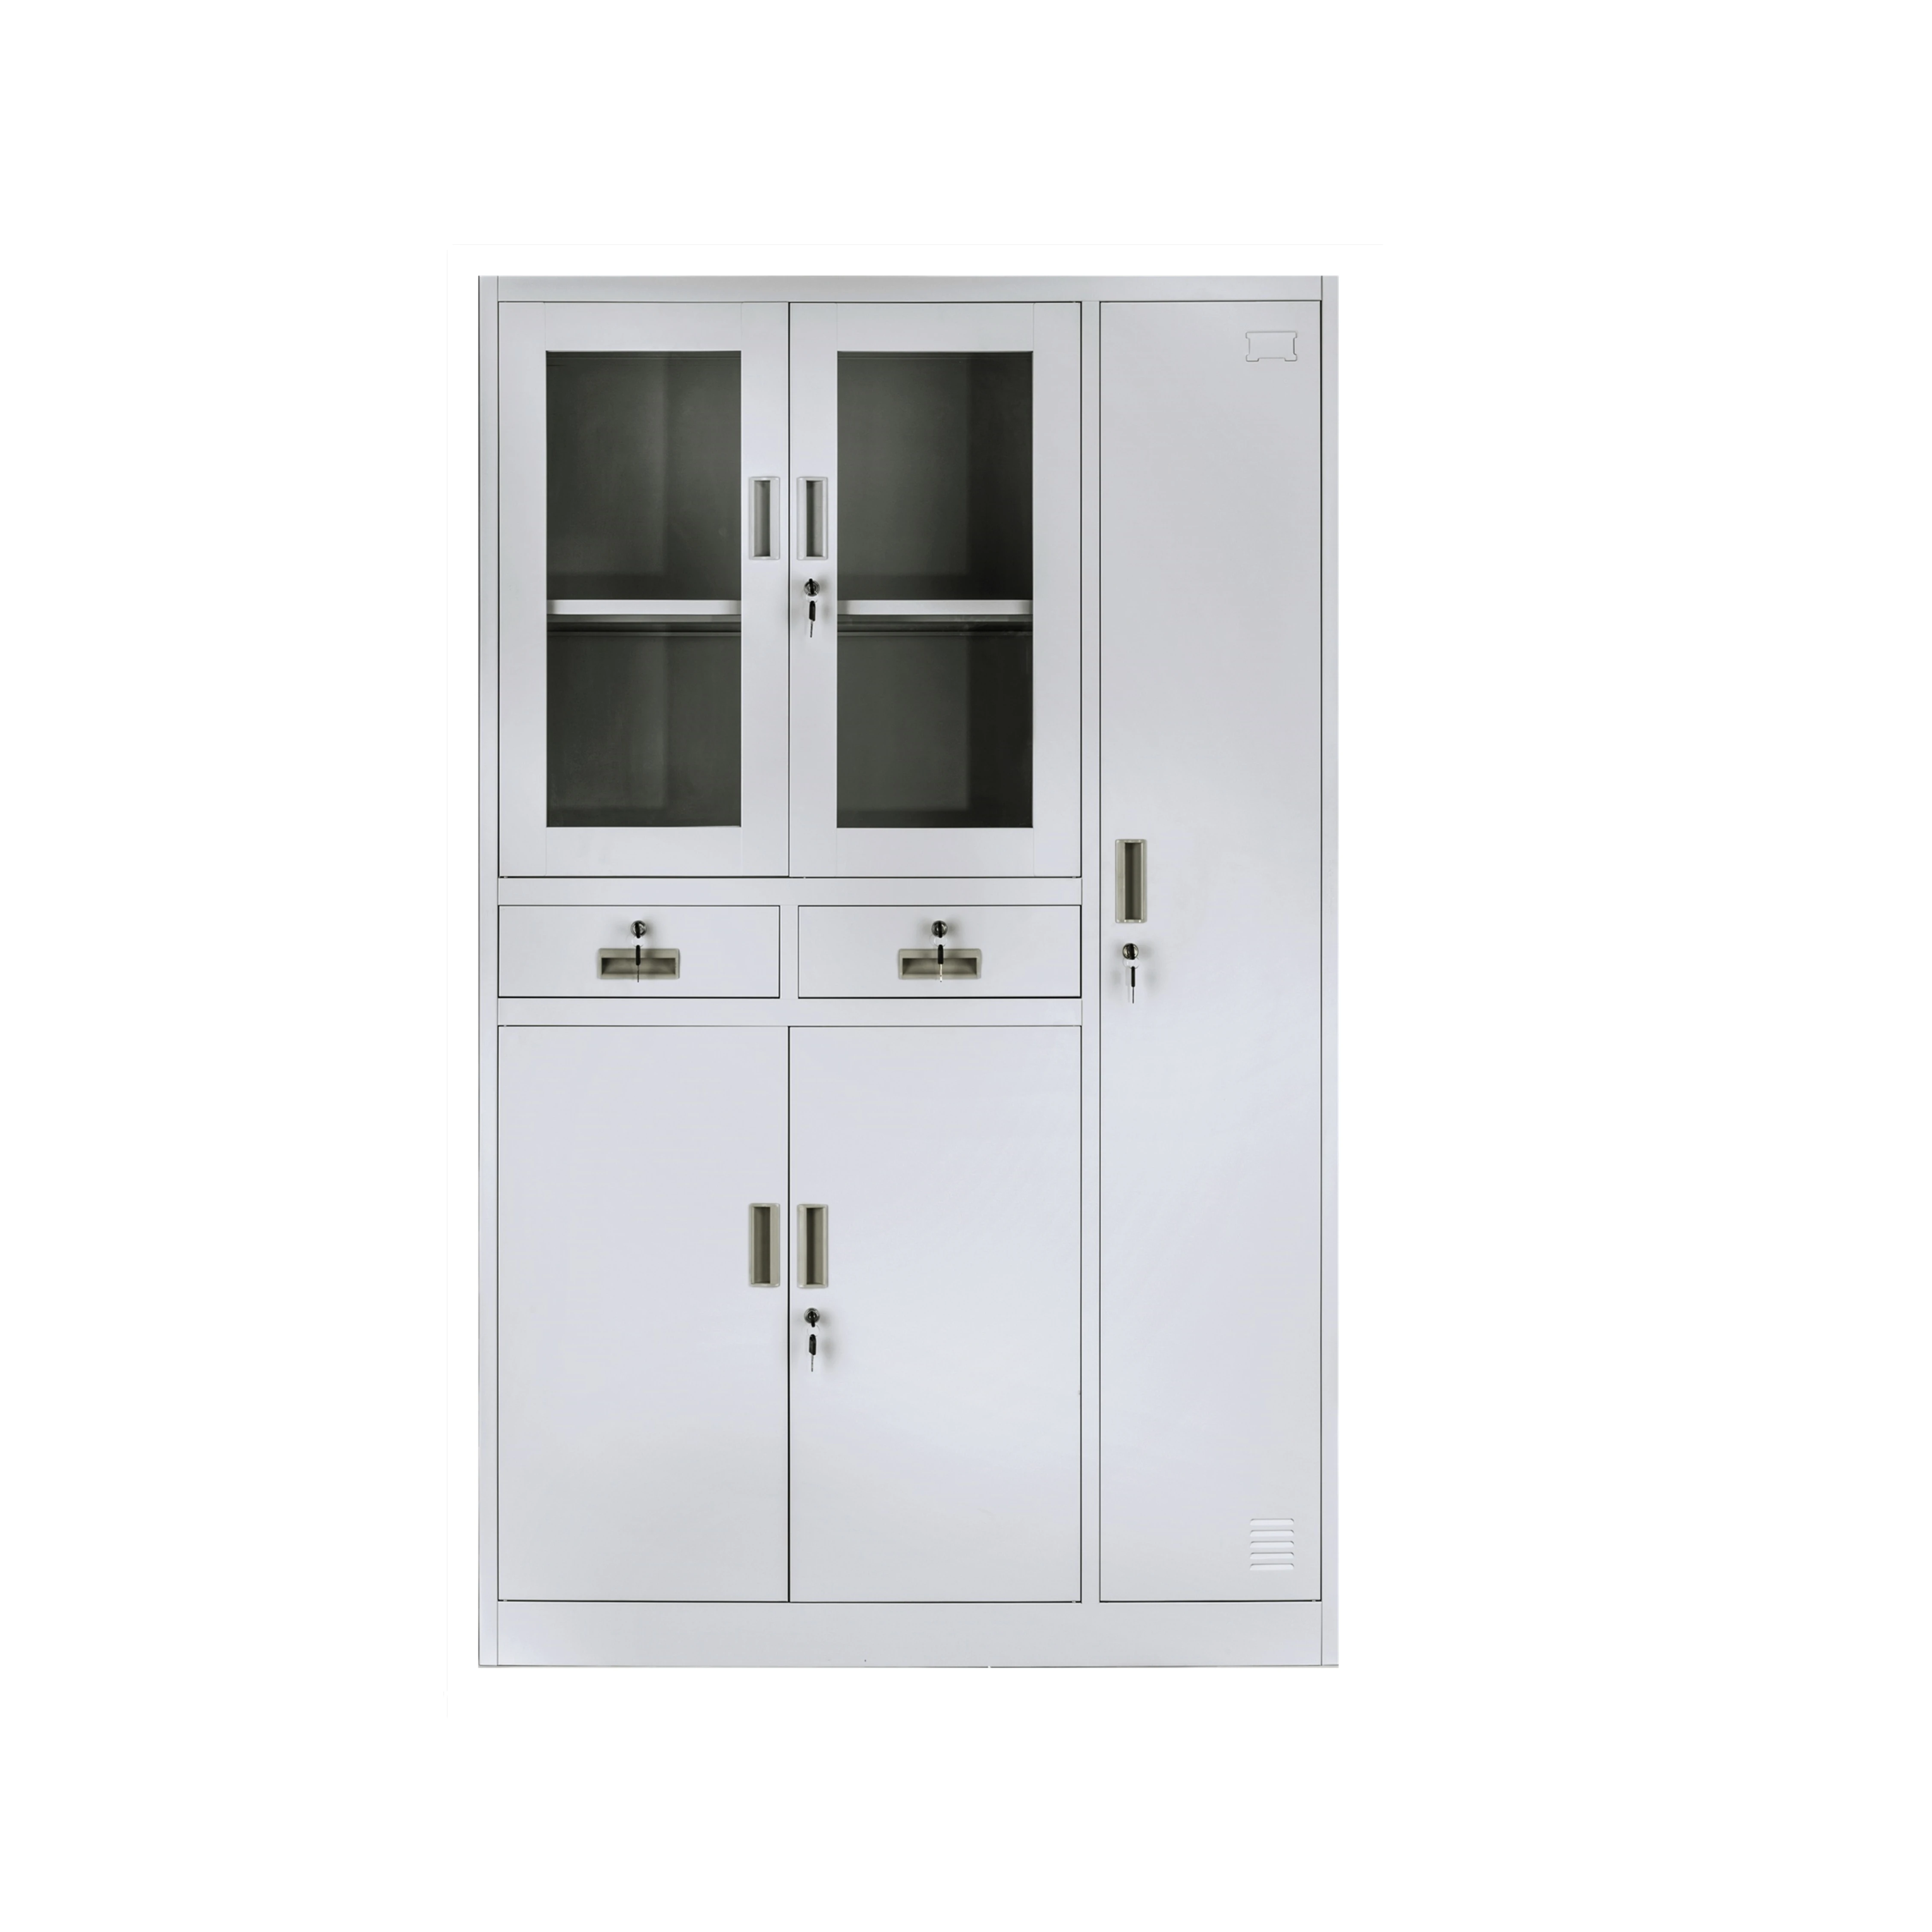 Office Cabinet Iron Cabinet With Glass - Buy Filing Cabinets,Metal  Wardrobe,Door Cabinet Product on 